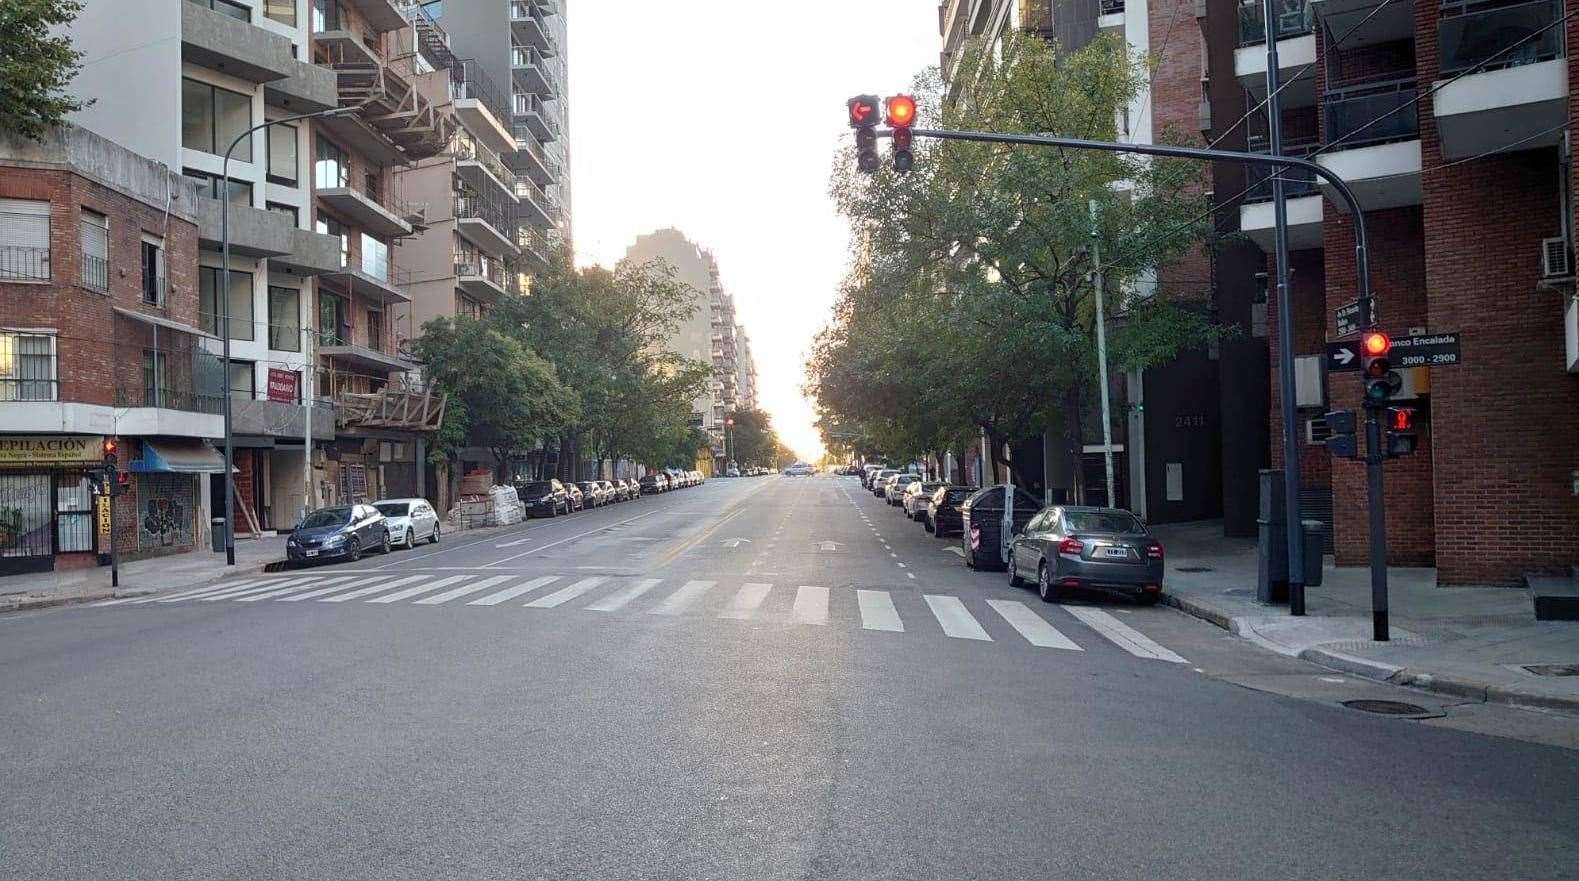 Deserted streets in Argentina where lockdown restrictions are even tighter than here in Britain